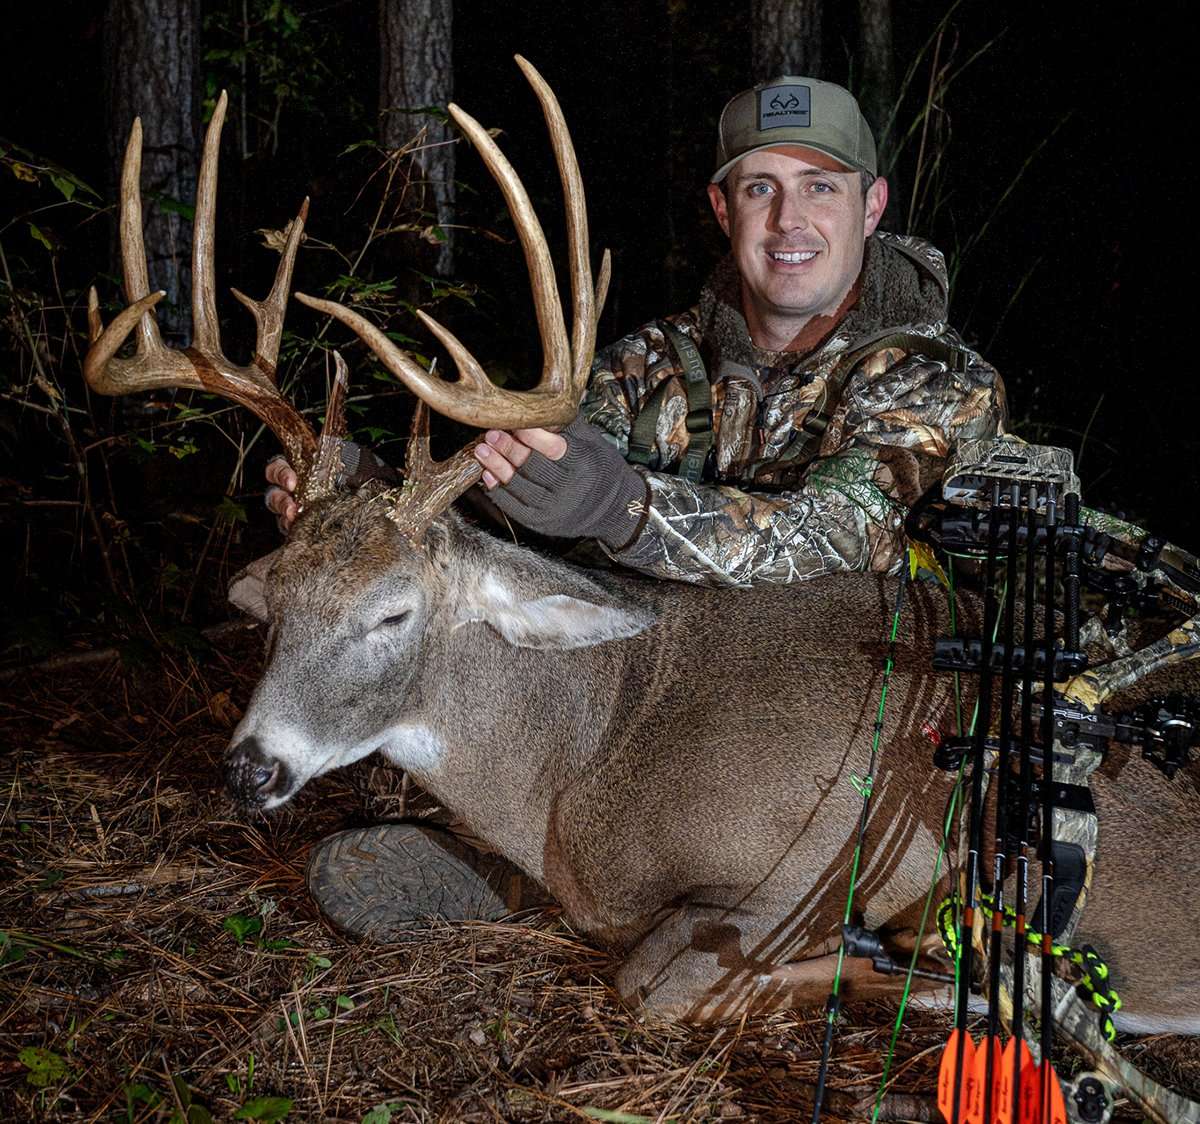 Jordan's tall buck scores 166-2/8 inches. Image by Realtree Media